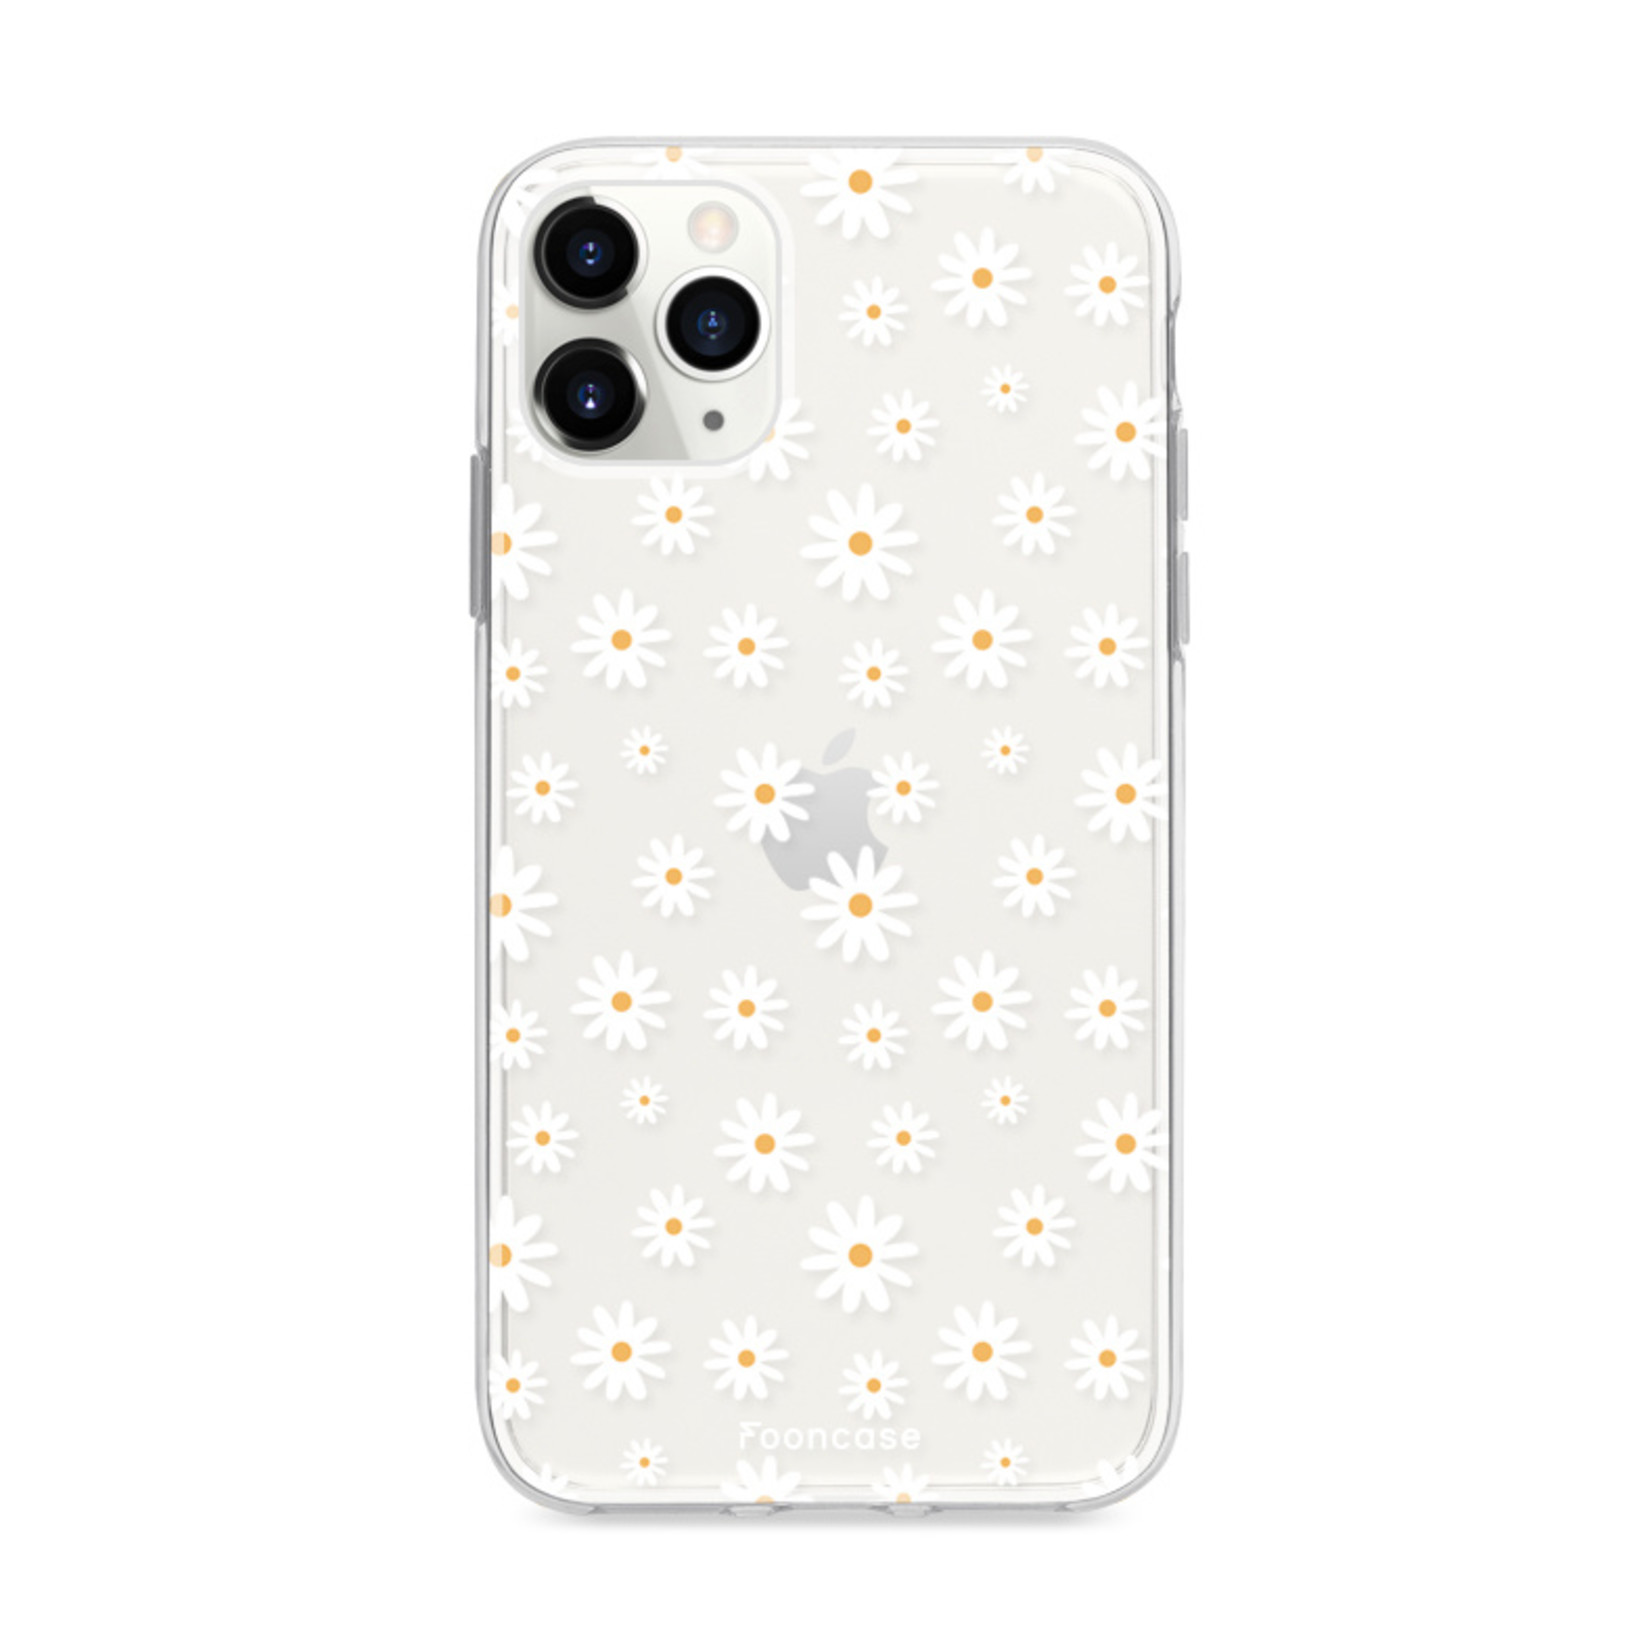 FOONCASE iPhone 11 Pro Max hoesje TPU Soft Case - Back Cover - Madeliefjes